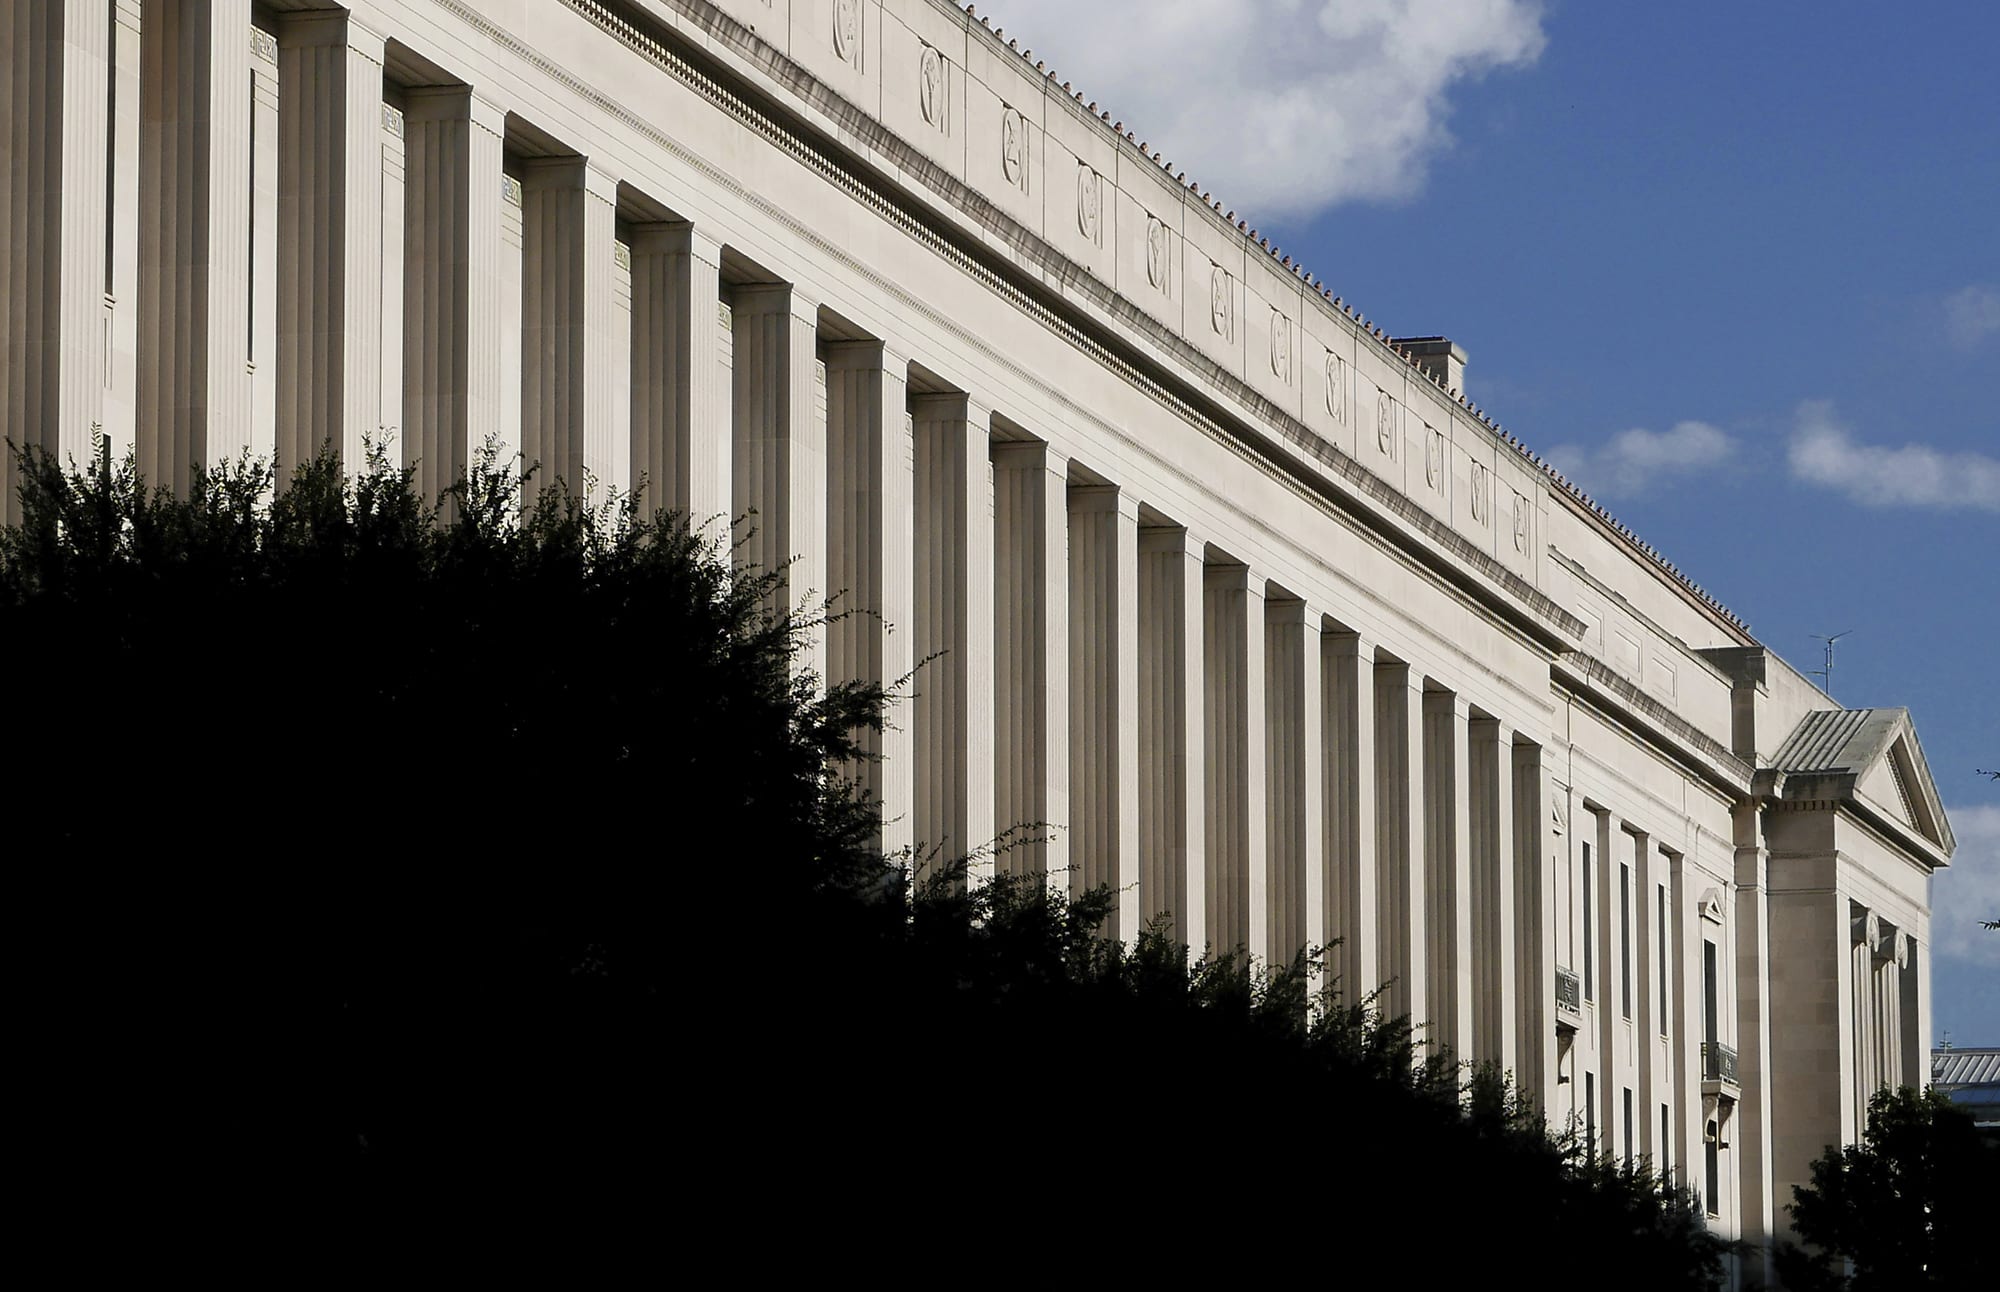 The Robert F. Kennedy Department of Justice Building in Washington, D.C.